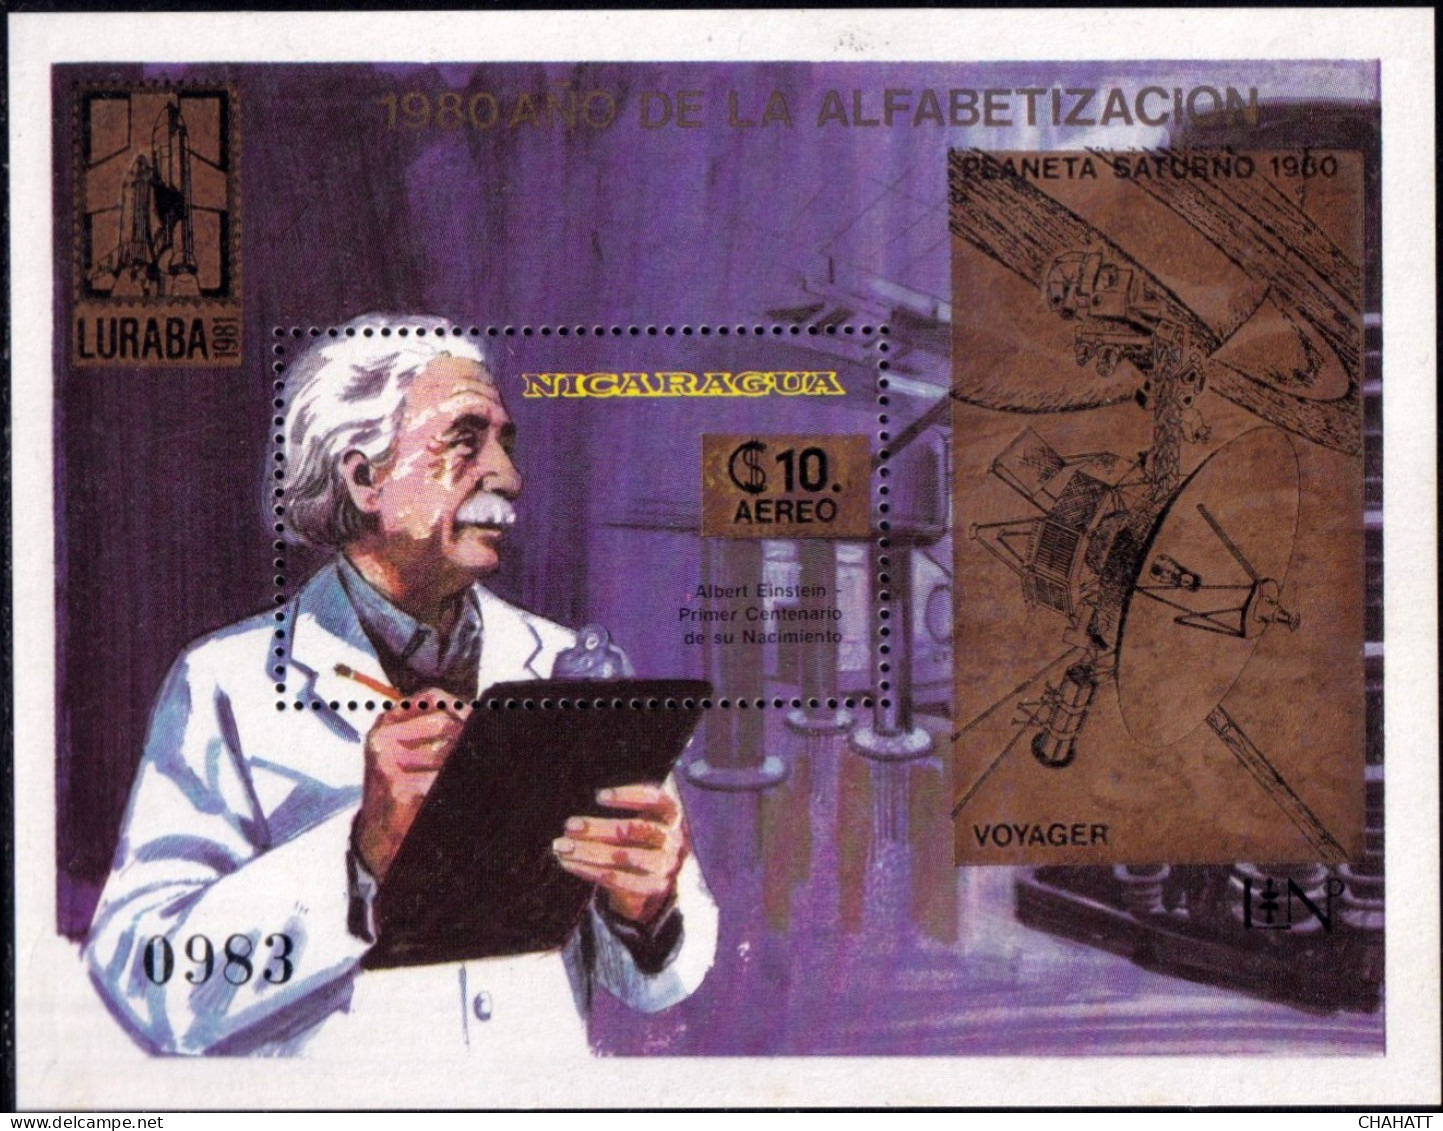 VOYAGER TOWARDS SATURN - NICARAGUA- 1980-GOLD OVERLAY WITH OVPT- EINSTEIN MS -MNH-M3-128 - North  America